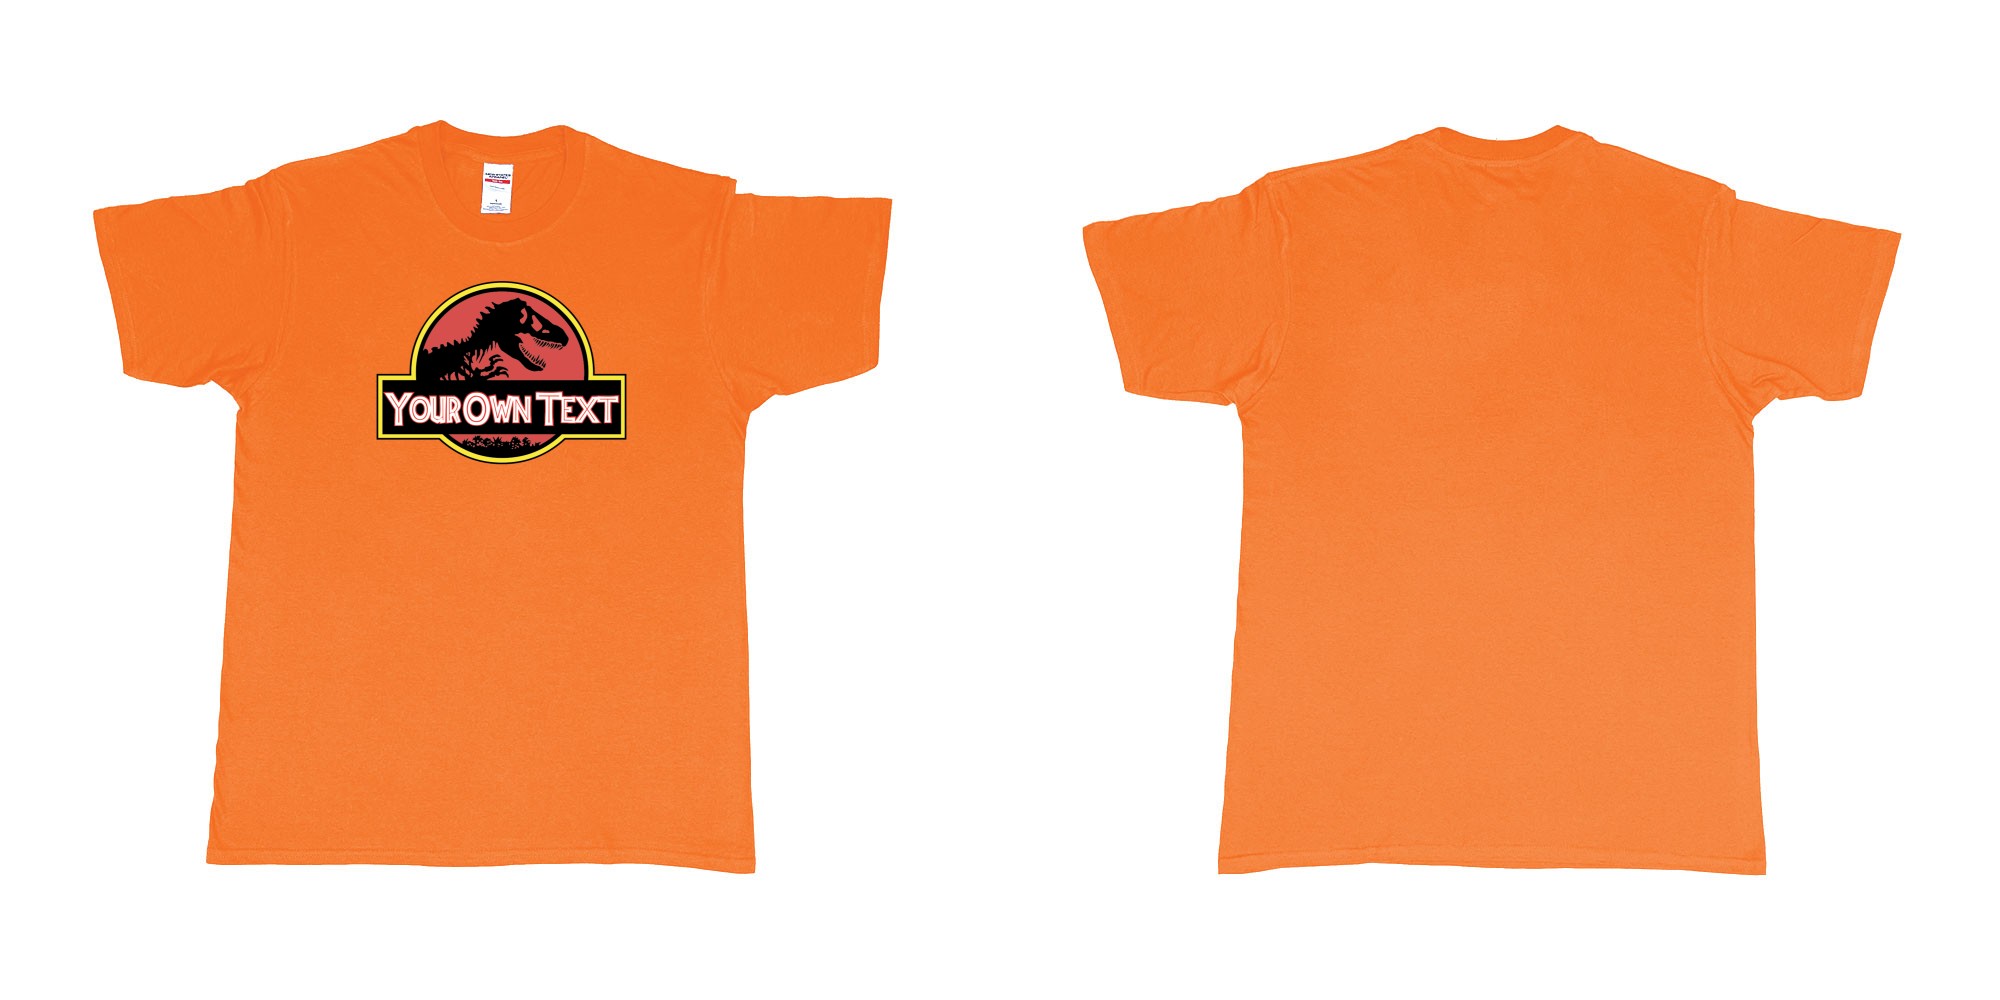 Custom tshirt design Jurassic Park in fabric color orange choice your own text made in Bali by The Pirate Way